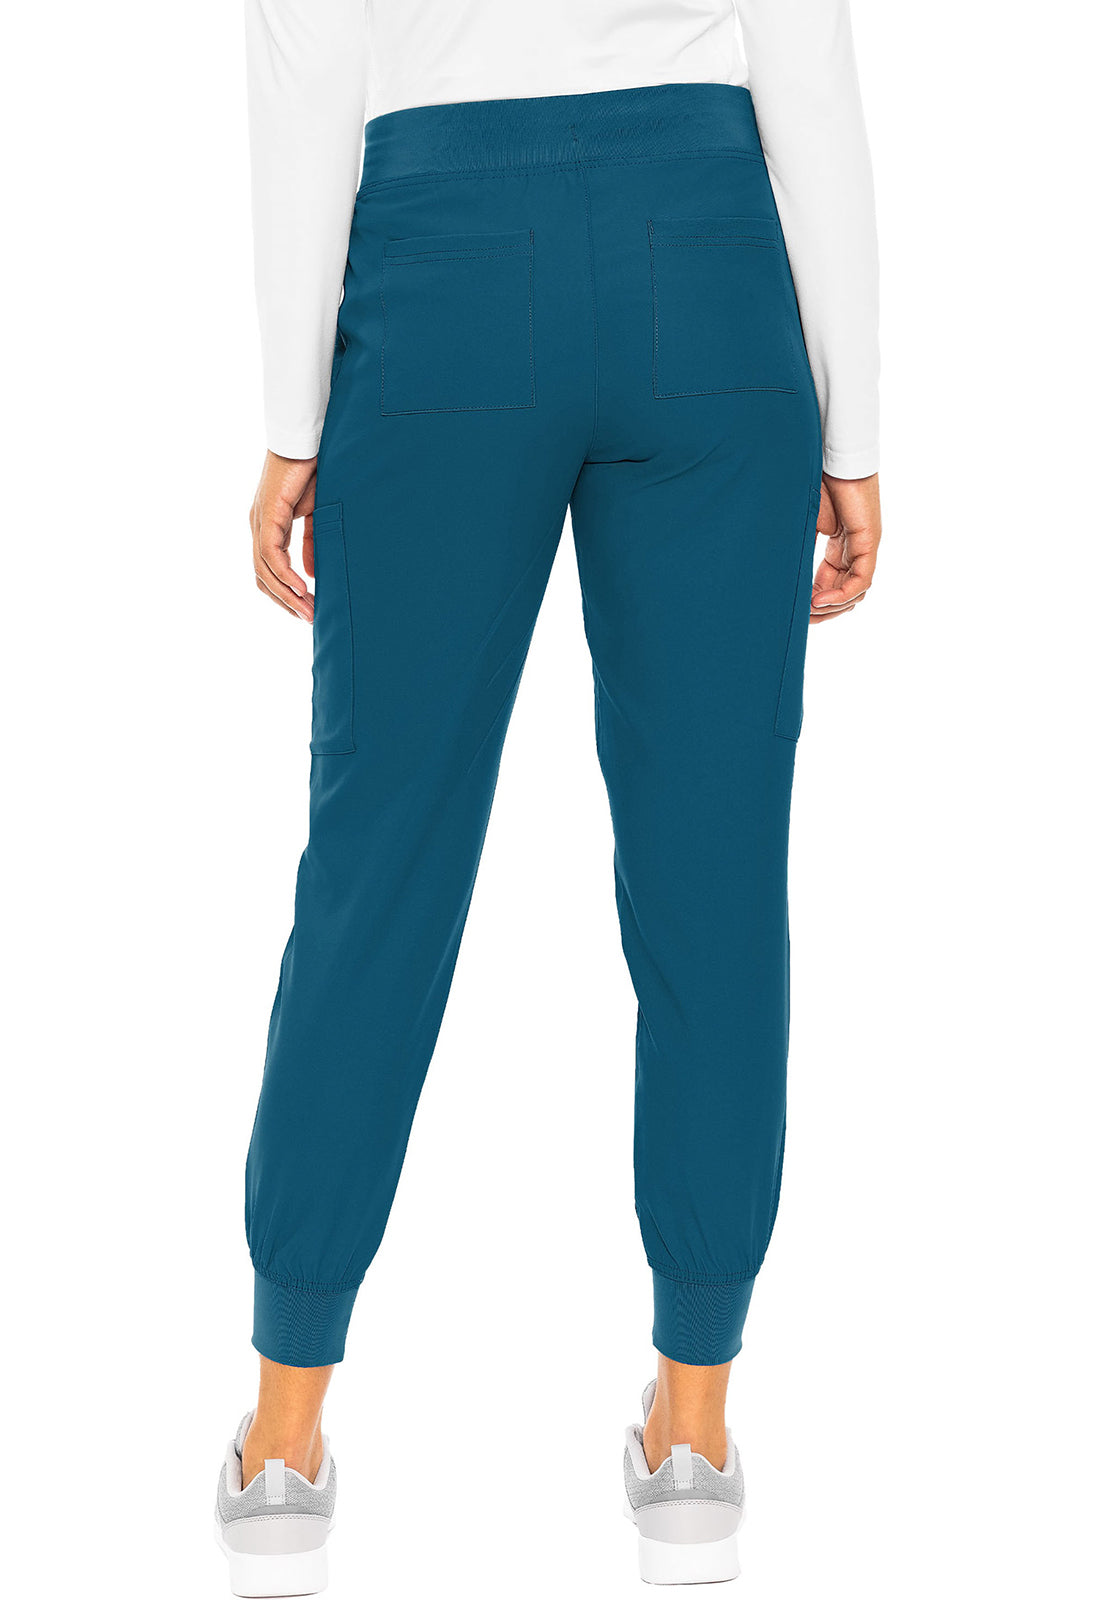 Med Couture Insight Women's Jogger Pant (Plus Size)